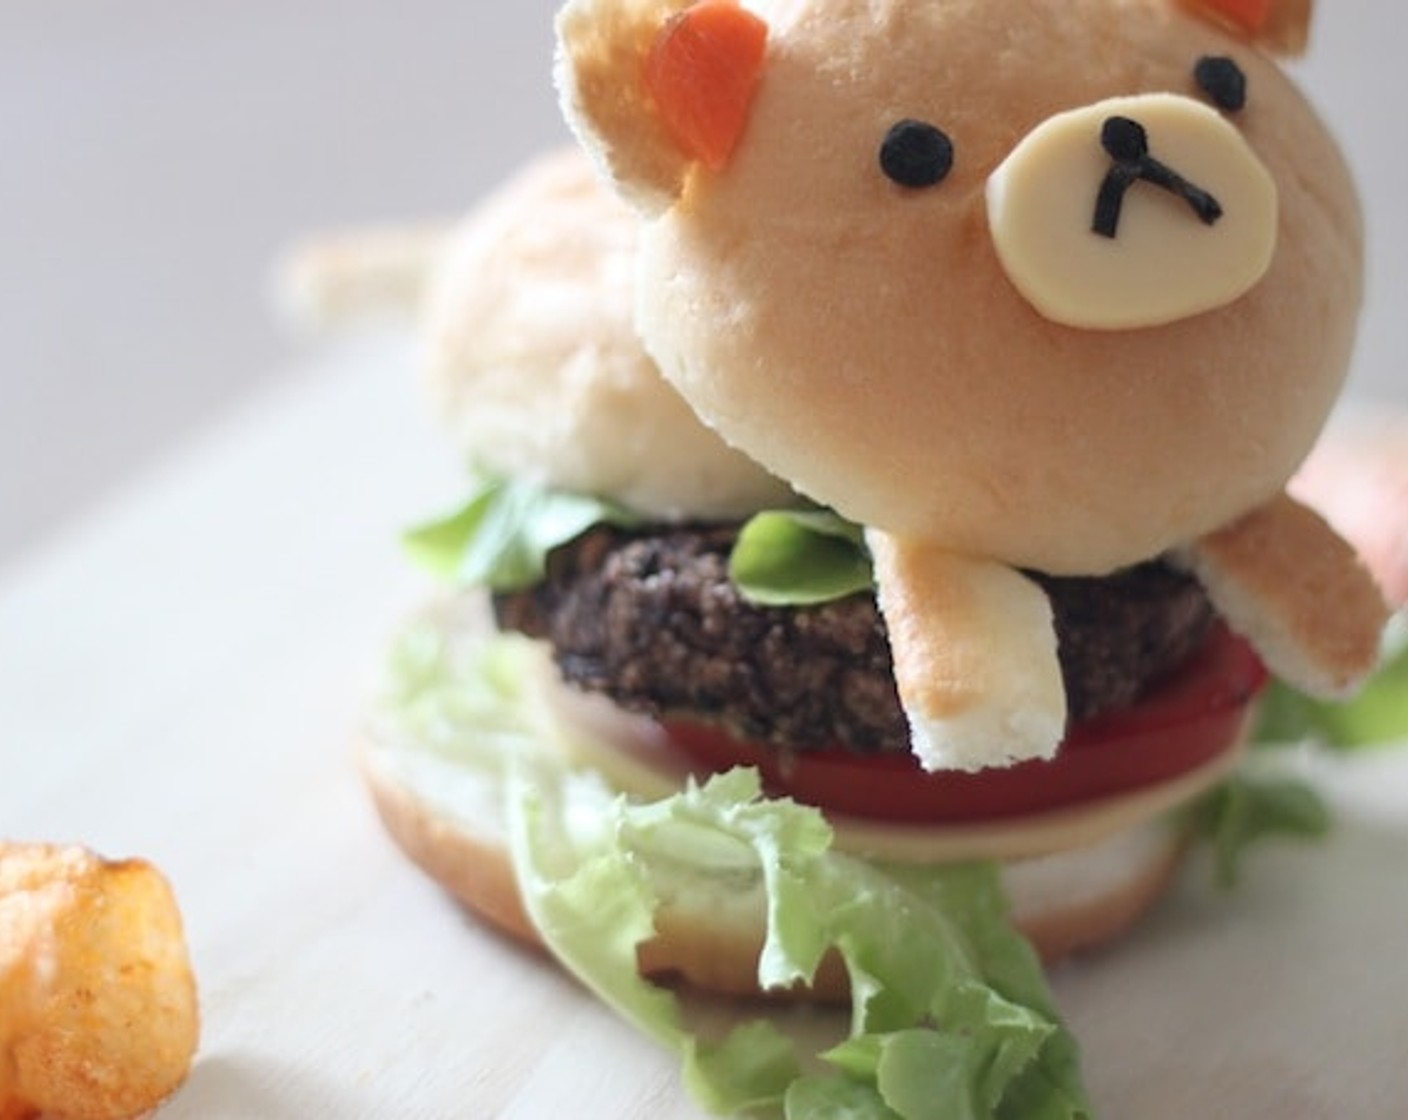 step 14 After adding all the layers, it's time for Rilakkuma to ride the burger. Serve and enjoy!